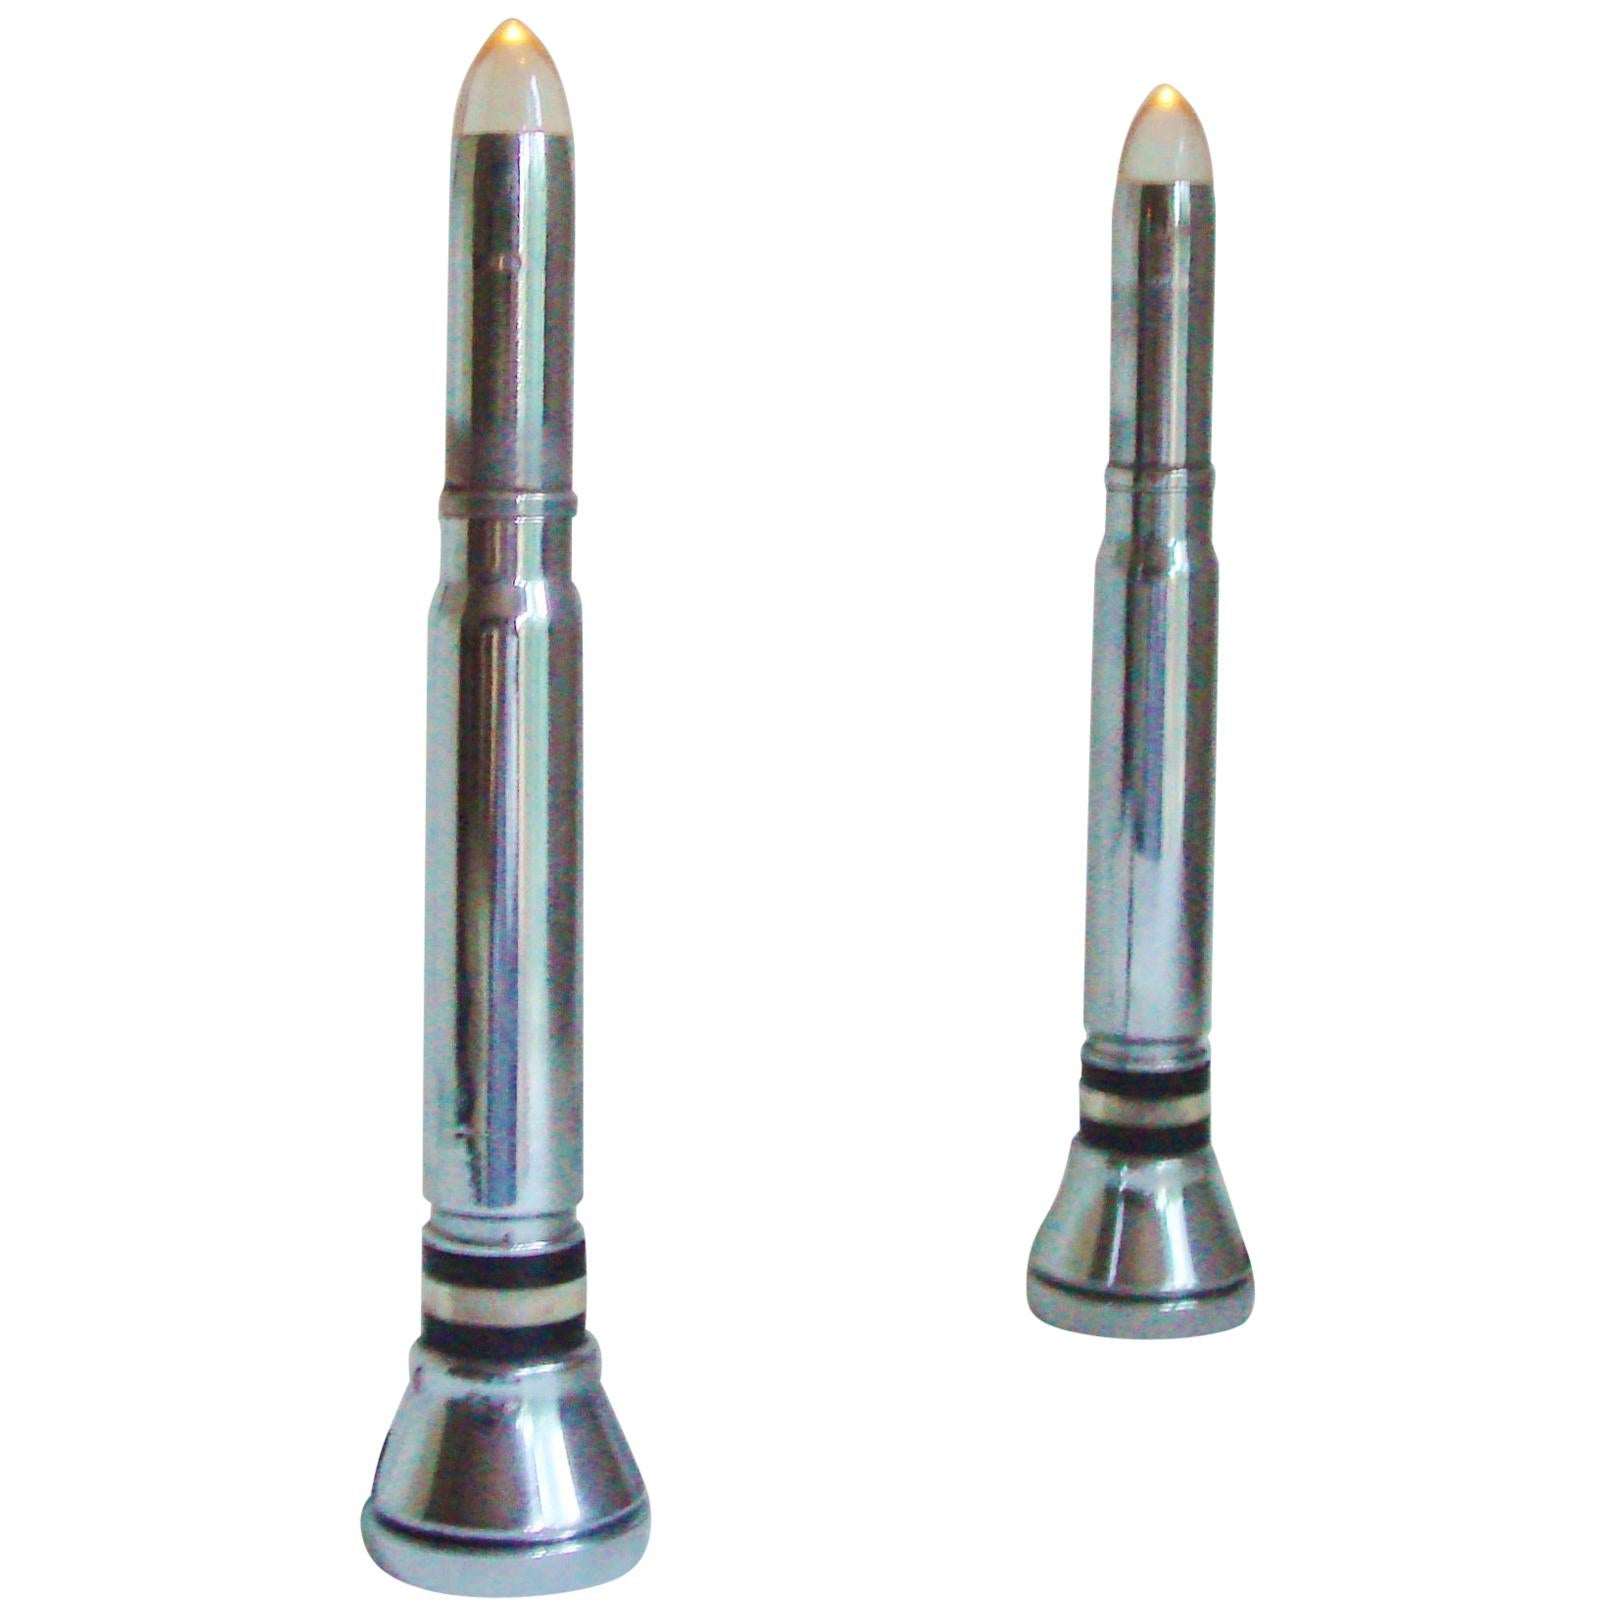 Pair of English Art Deco Chrome and Bakelite Spitfire Bullet Faux-Candle Lamps